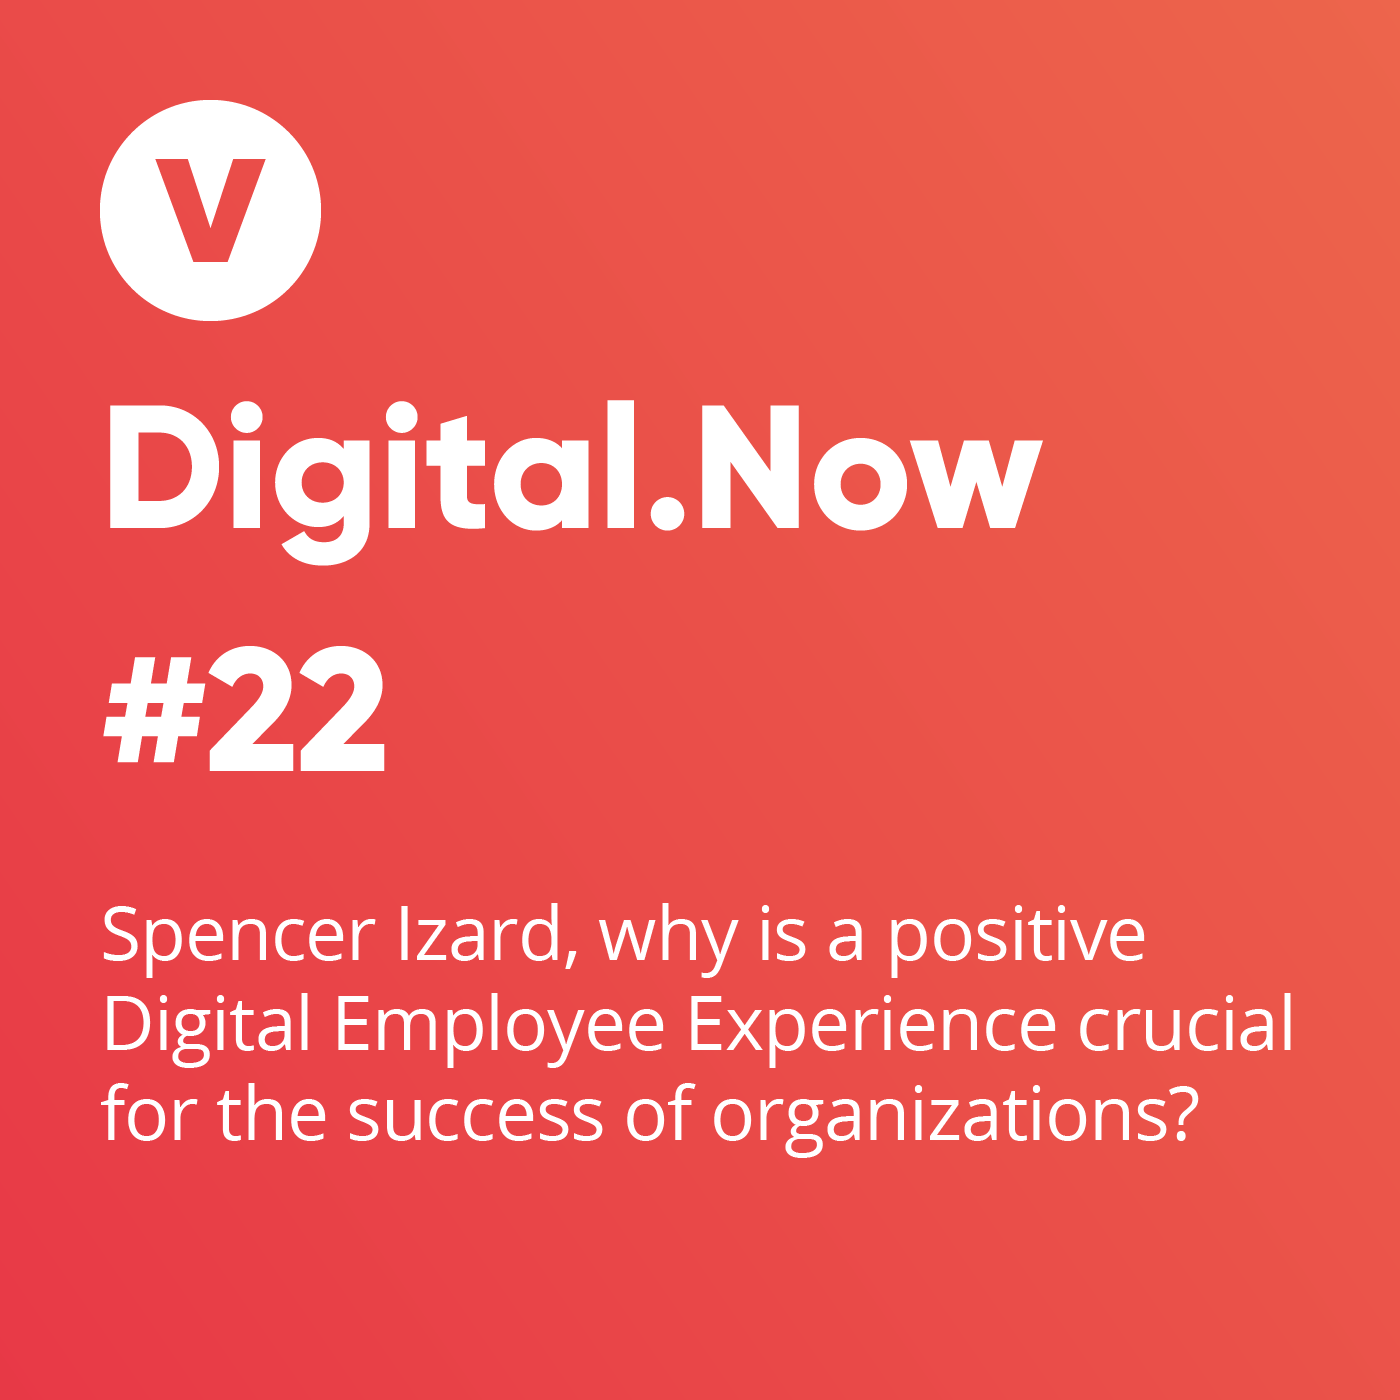 Spencer Izard, why is a positive Digital Employee Experience crucial for the success of organizations?